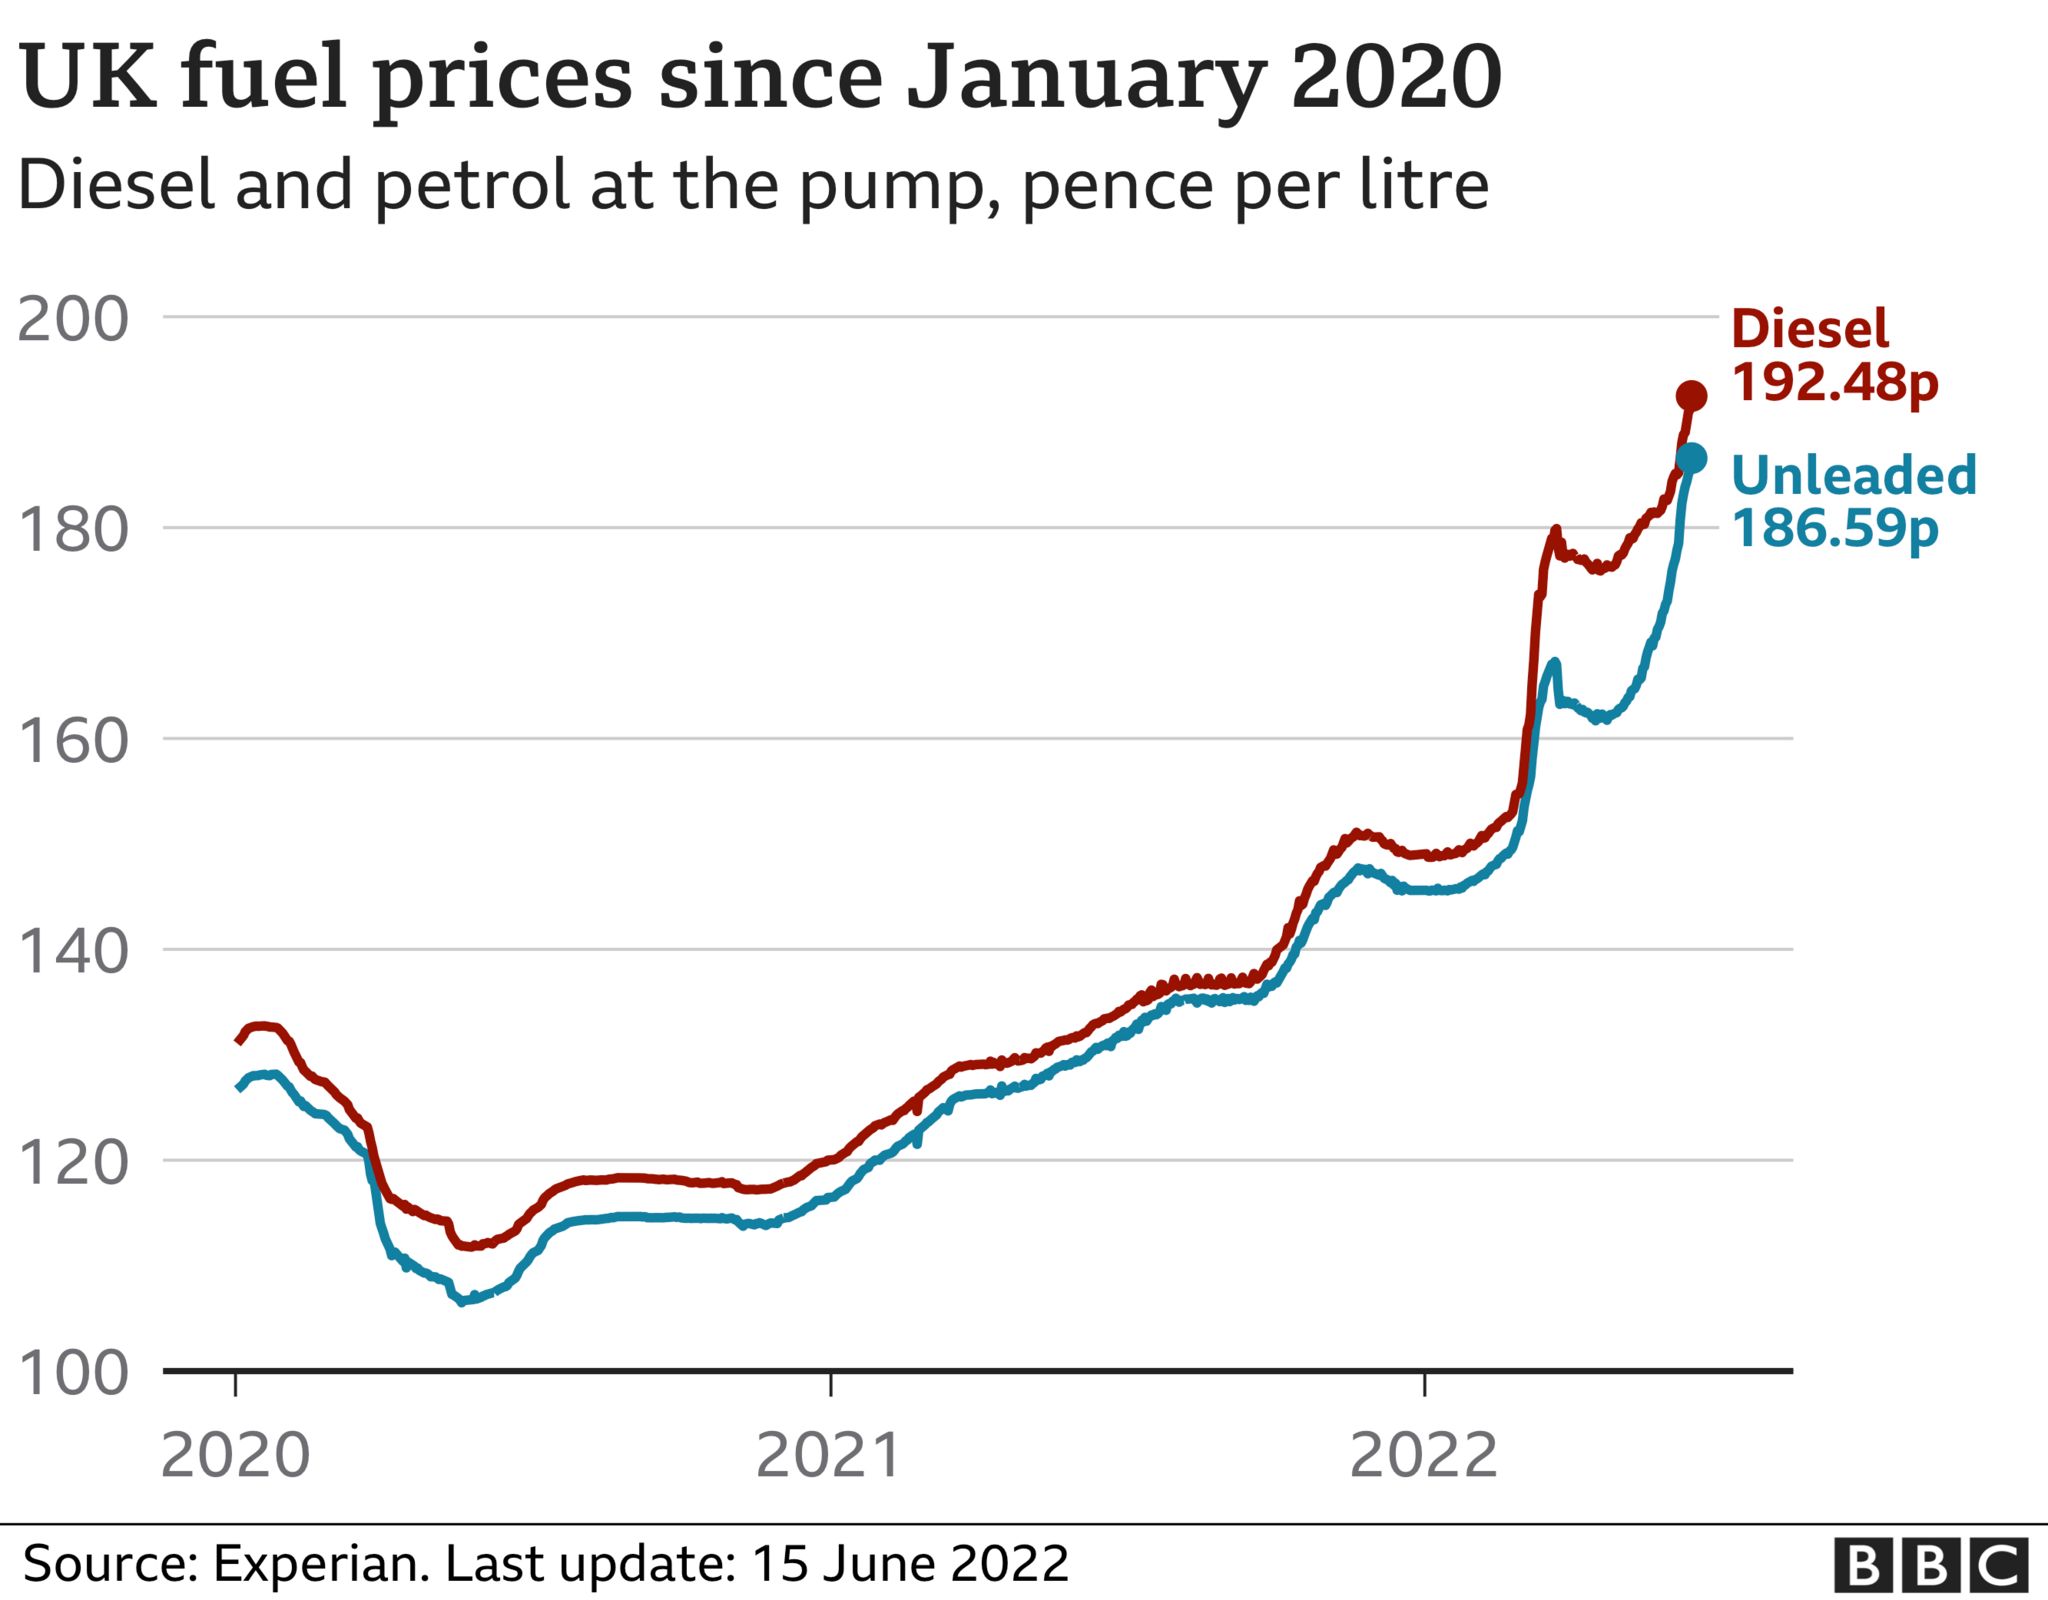 Graphic showing the change in fuel prices since the start of the pandemic